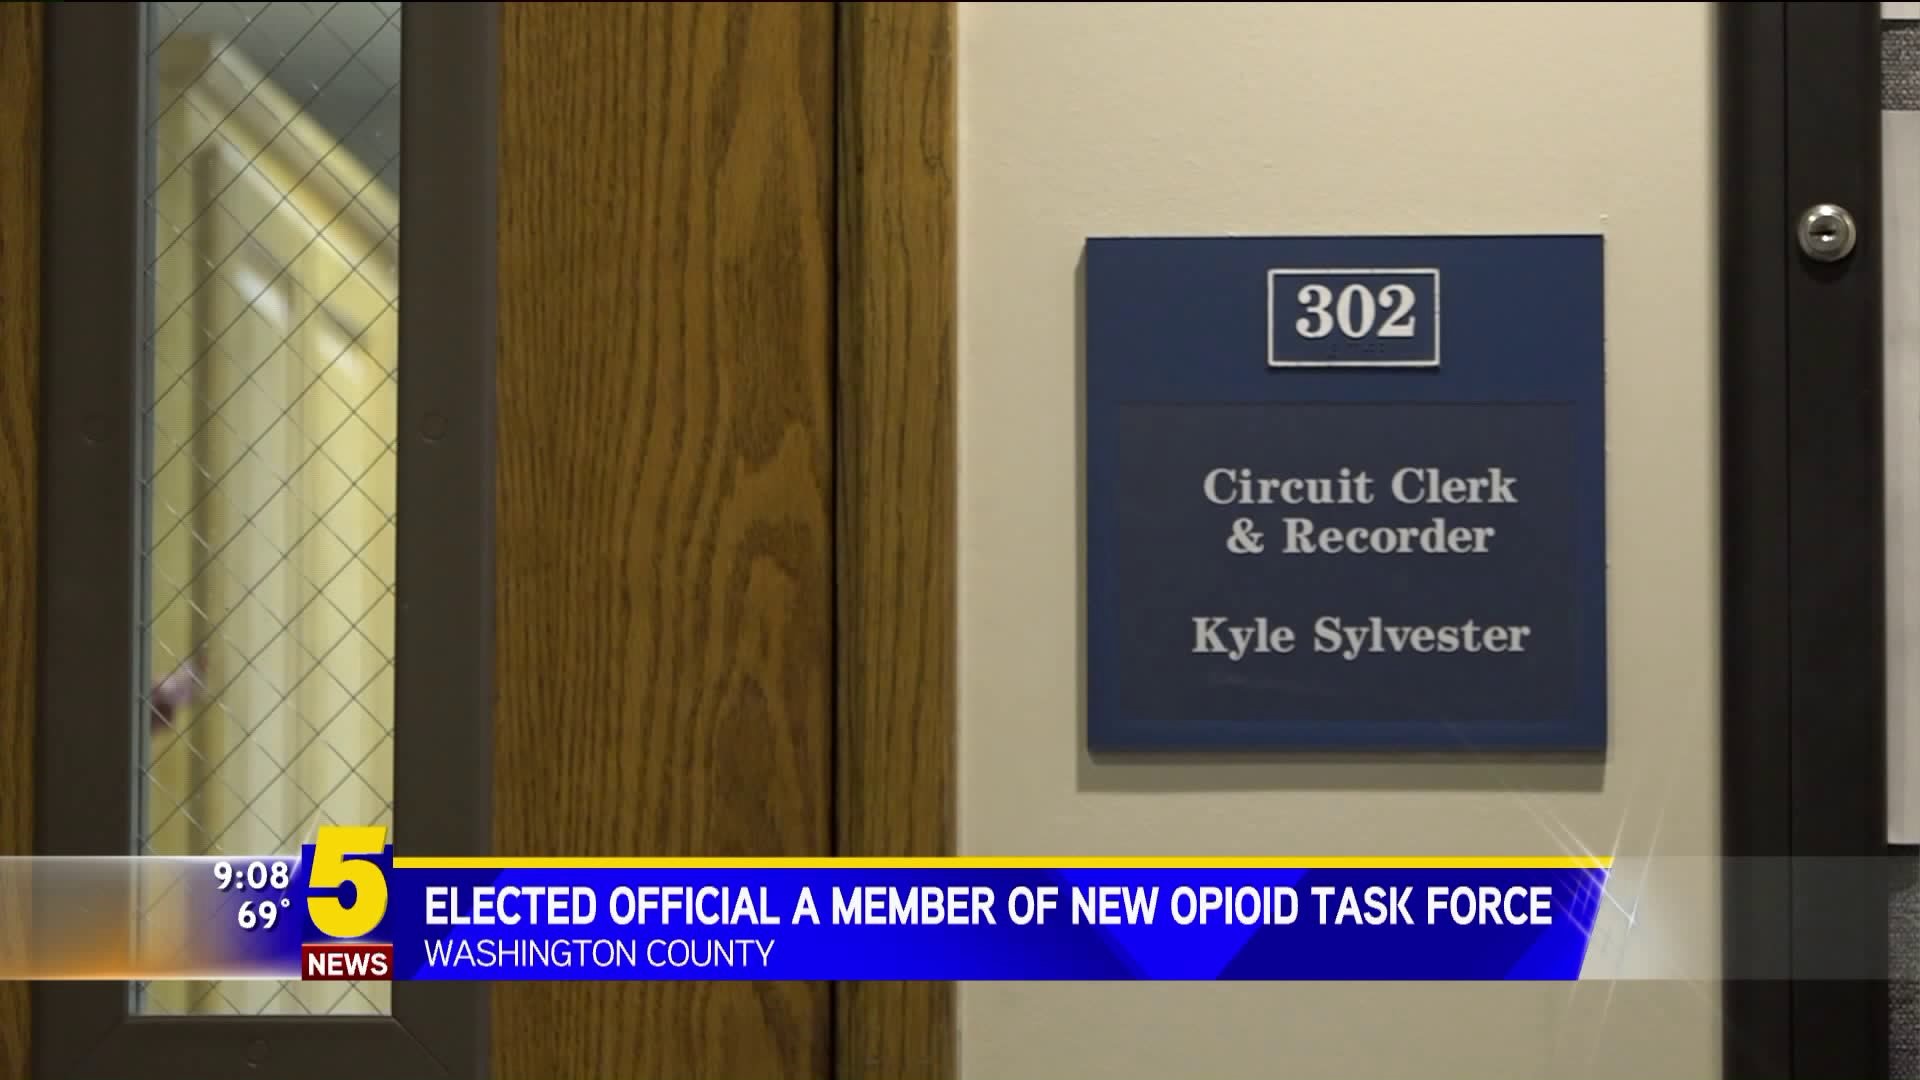 Elected Official A Member Of New Opioid Task Force